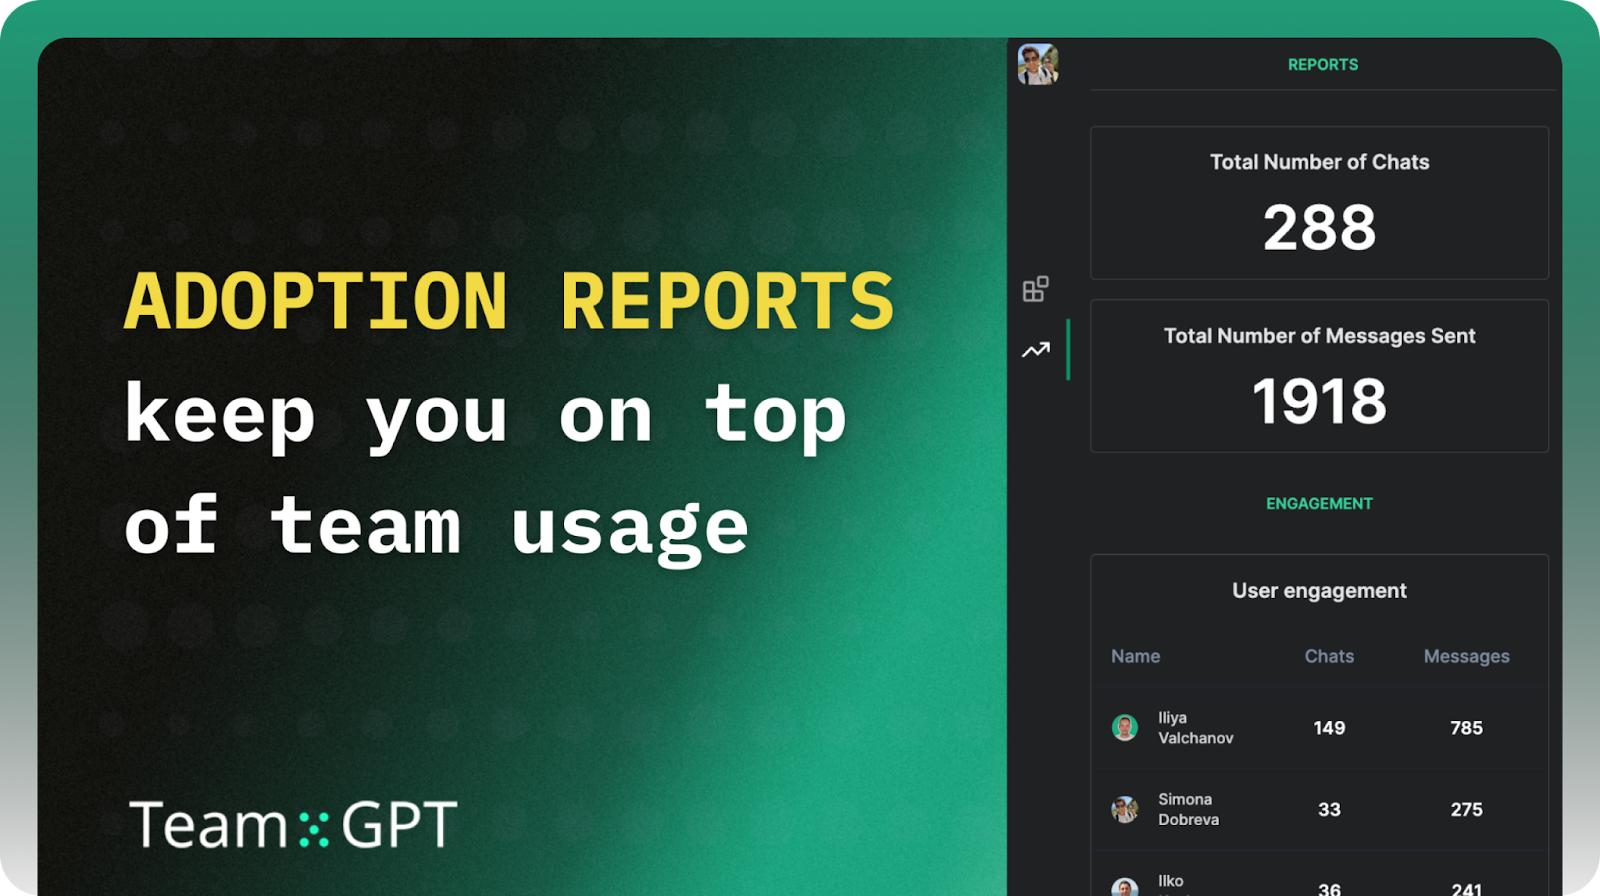 Adoption reports in Team-GPT keep you on top of team usage